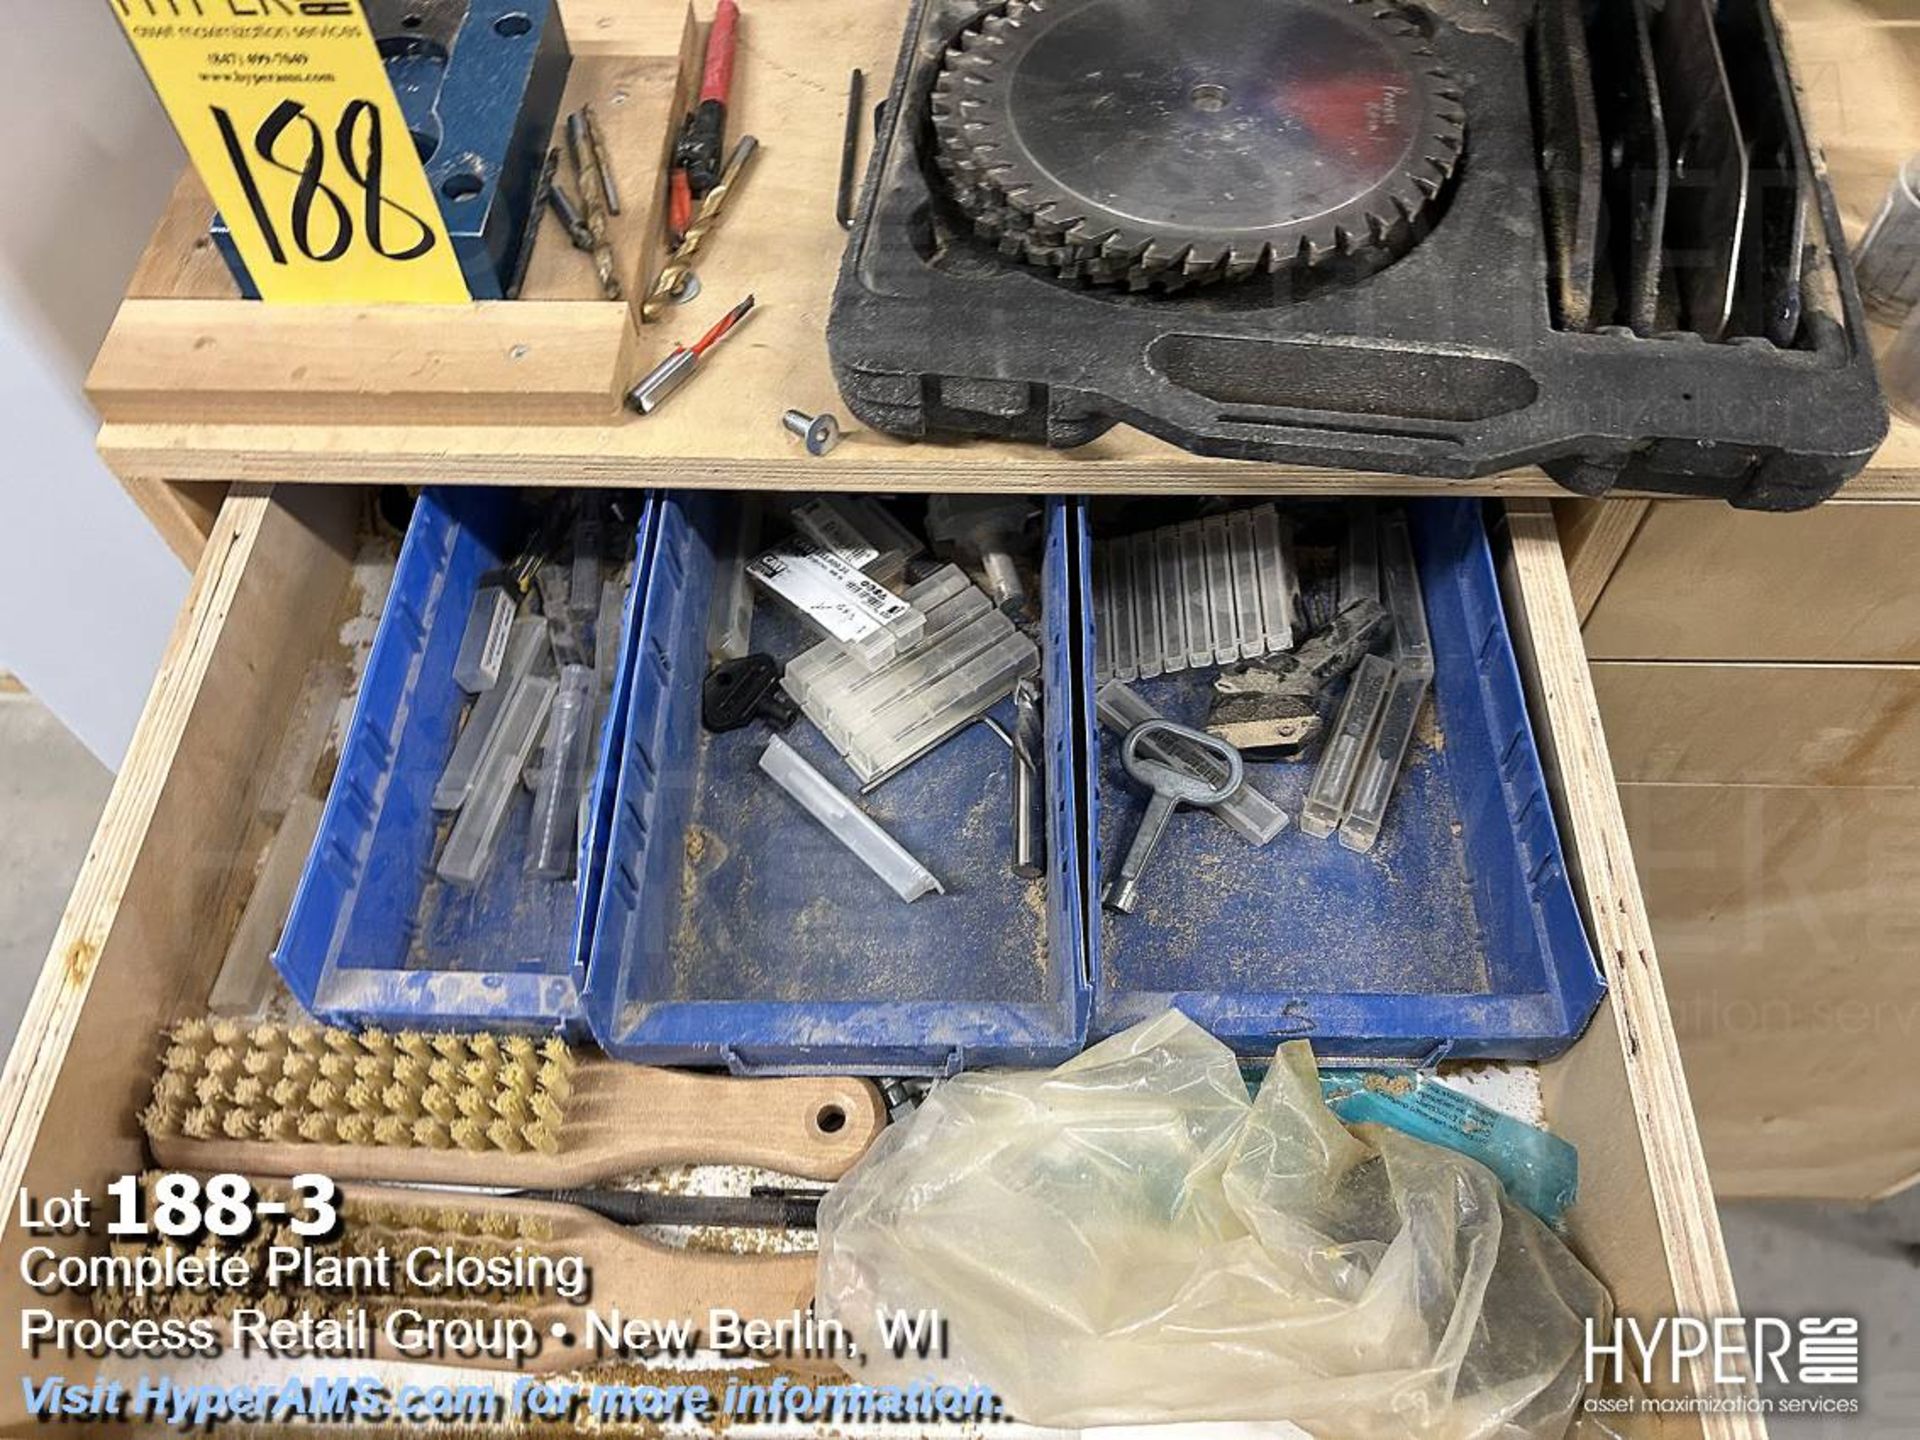 Lot: Biesse tooling, saw blades, collets, tool vise with shelf, and cabinet - Image 3 of 5